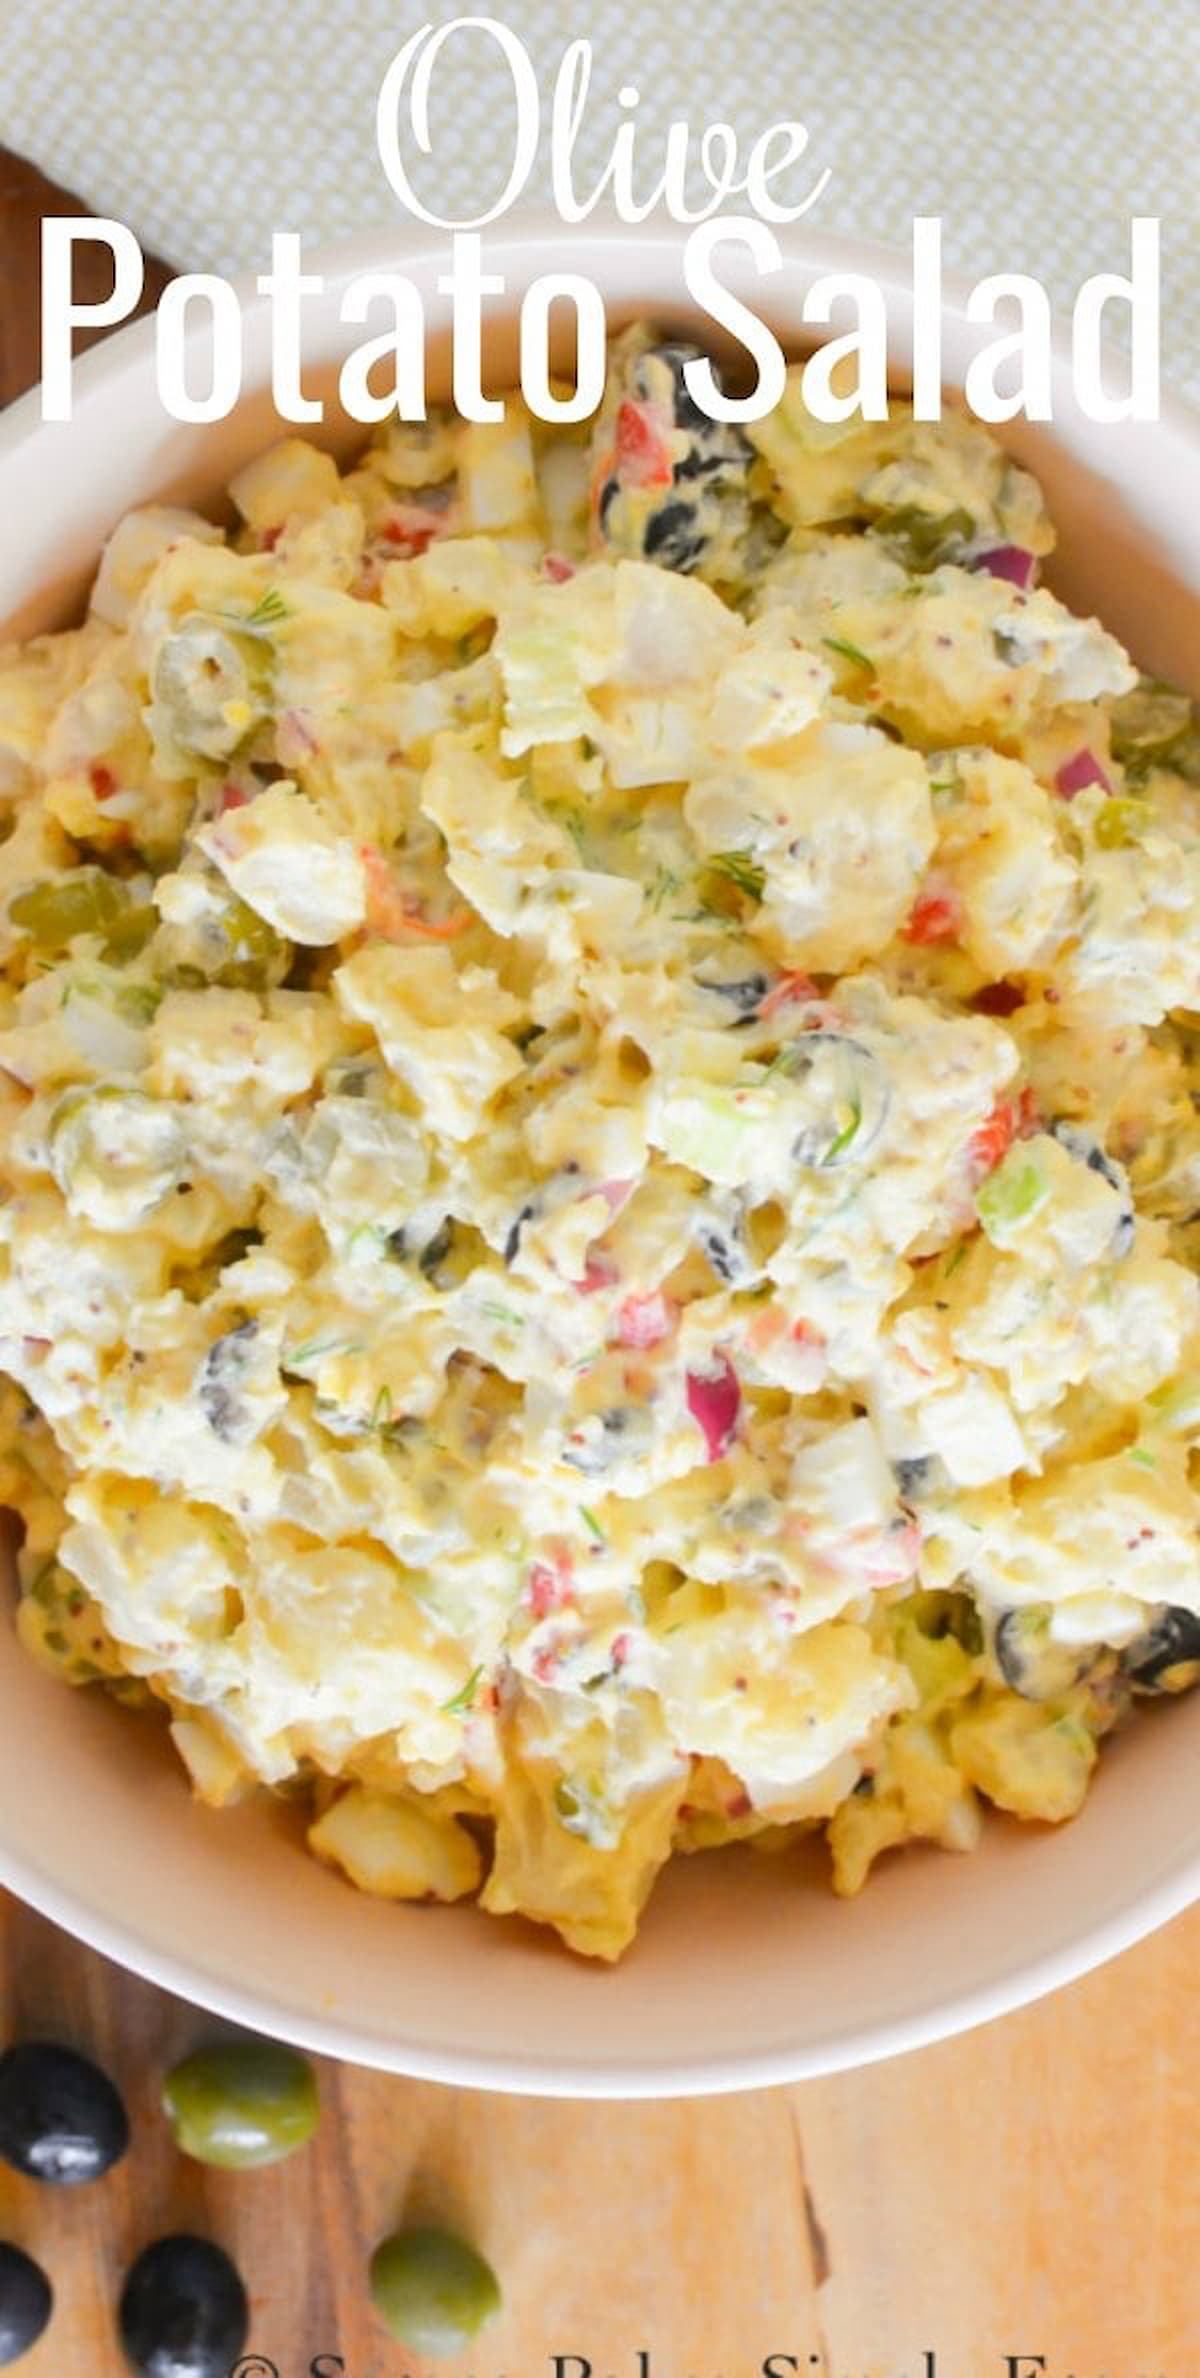 A bowl of Potato Salad with Black and Green Olives in a tangy potato salad dressing.